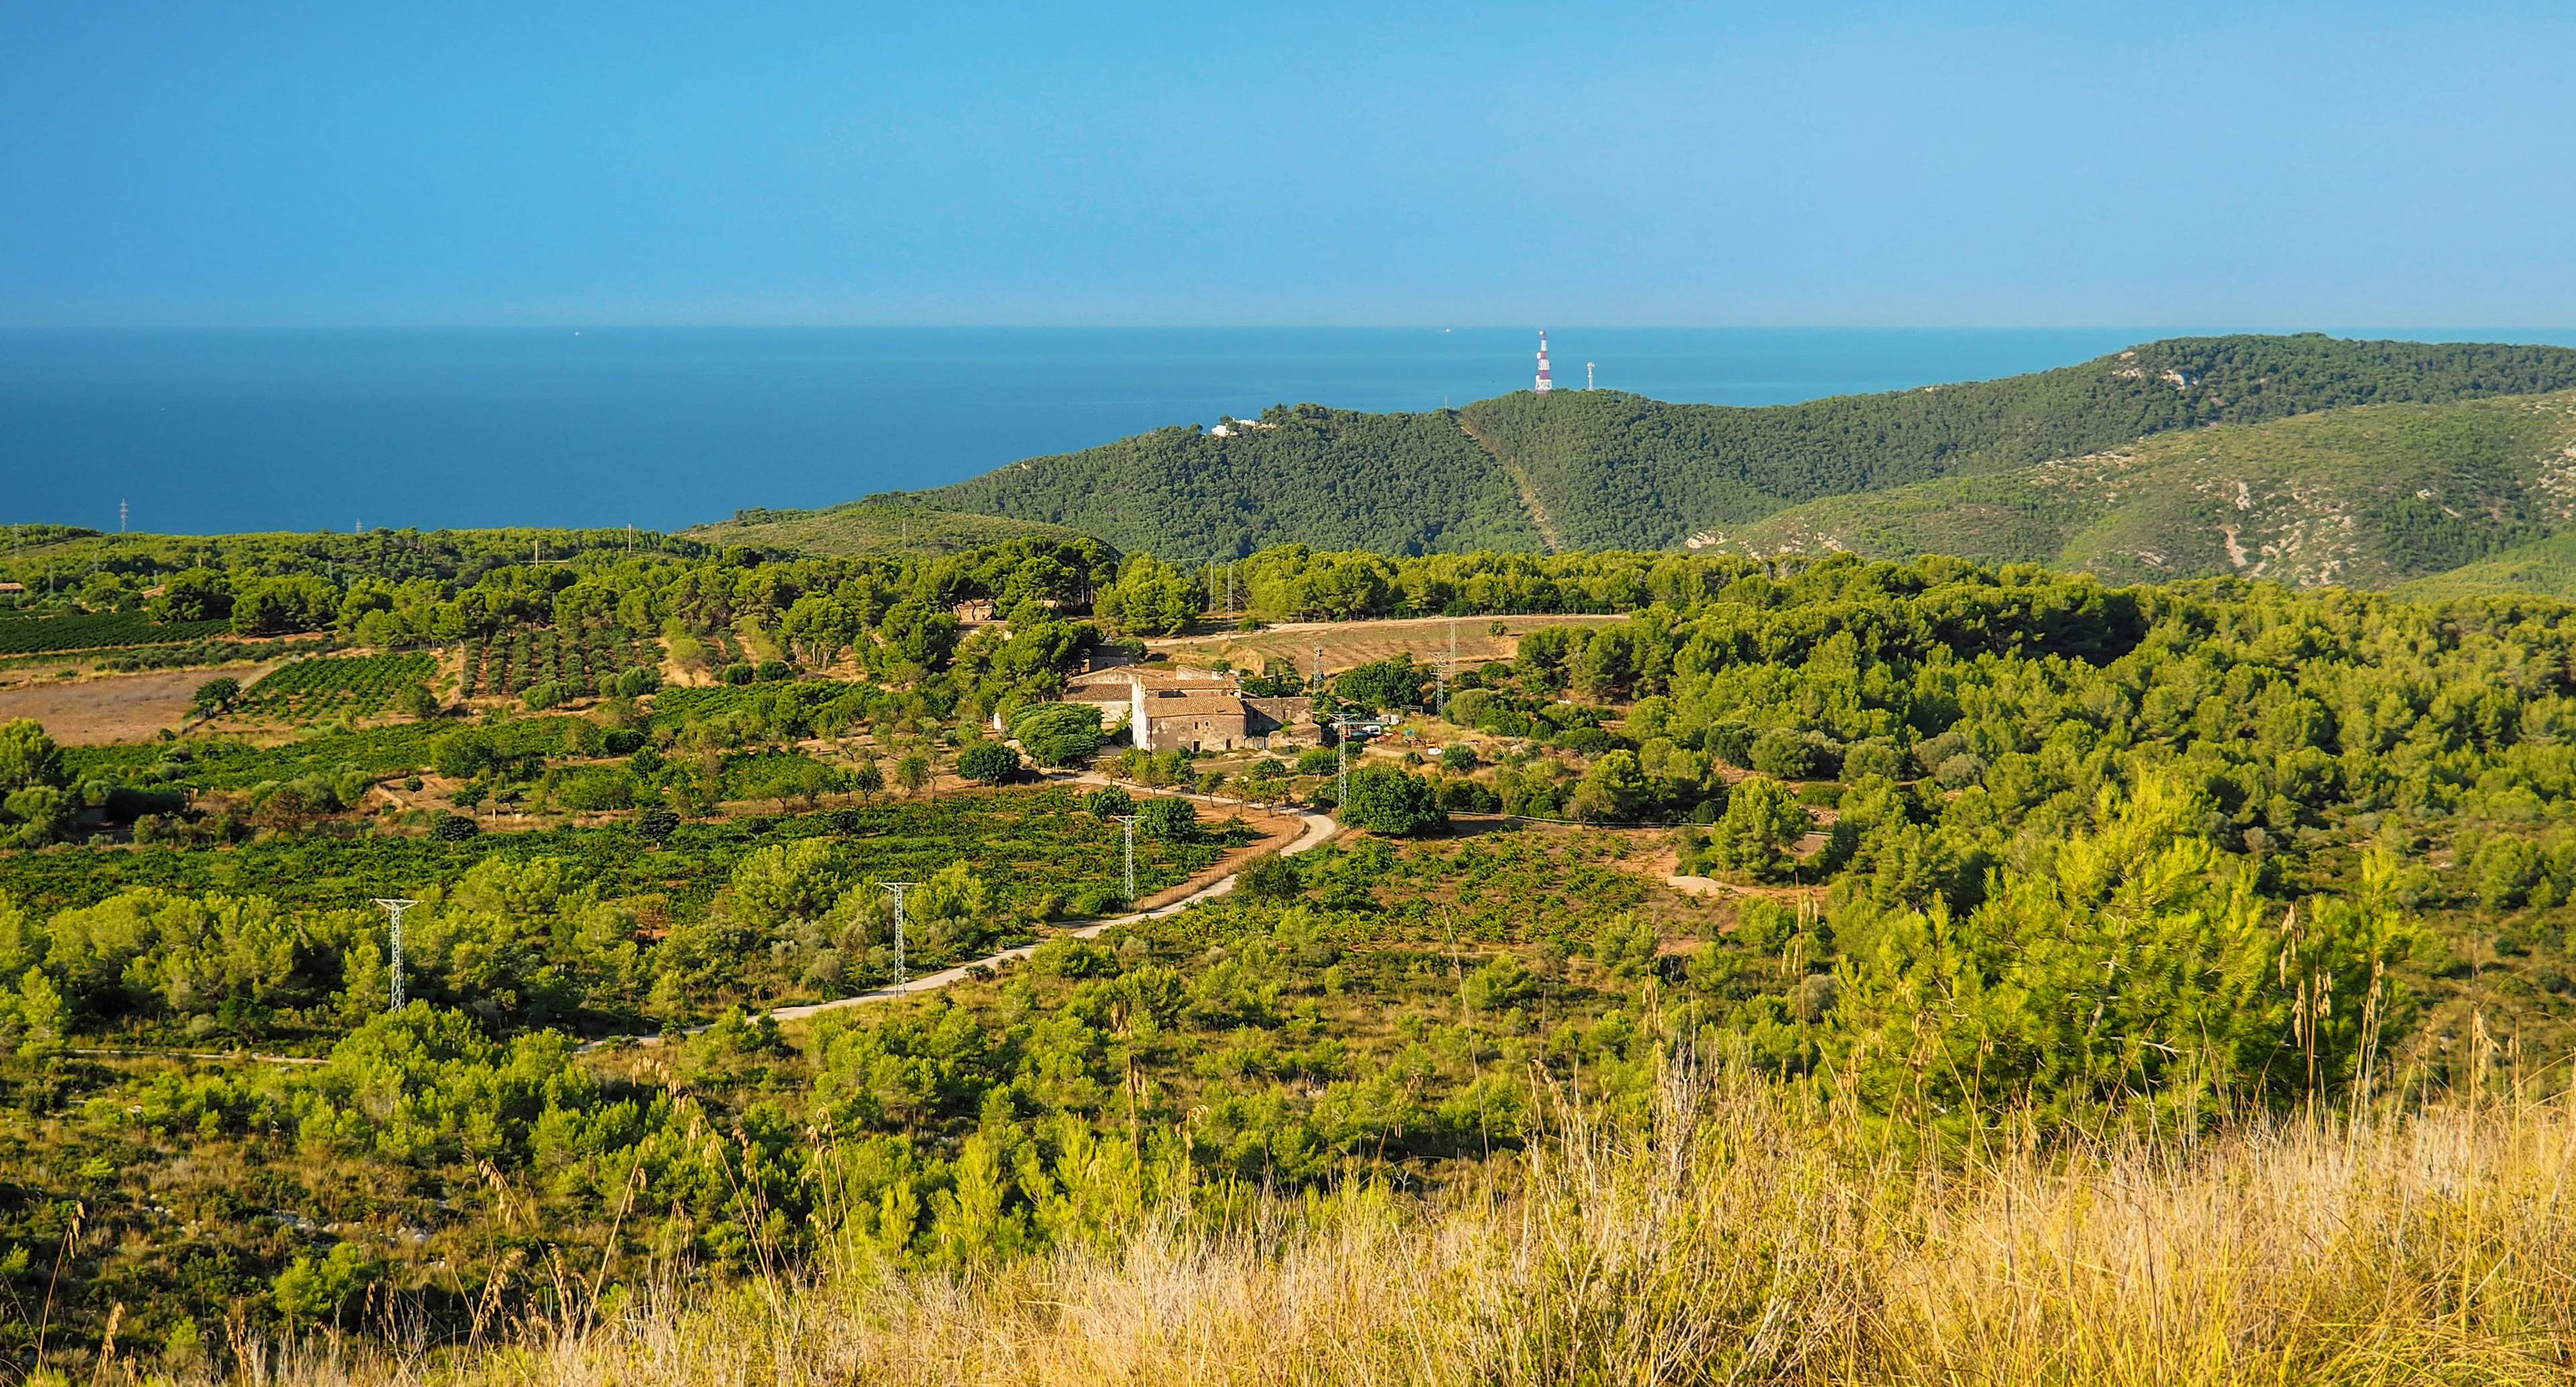 Architecture and Nature: From Sitges to Gava Passing by the Garraf Natural Park!